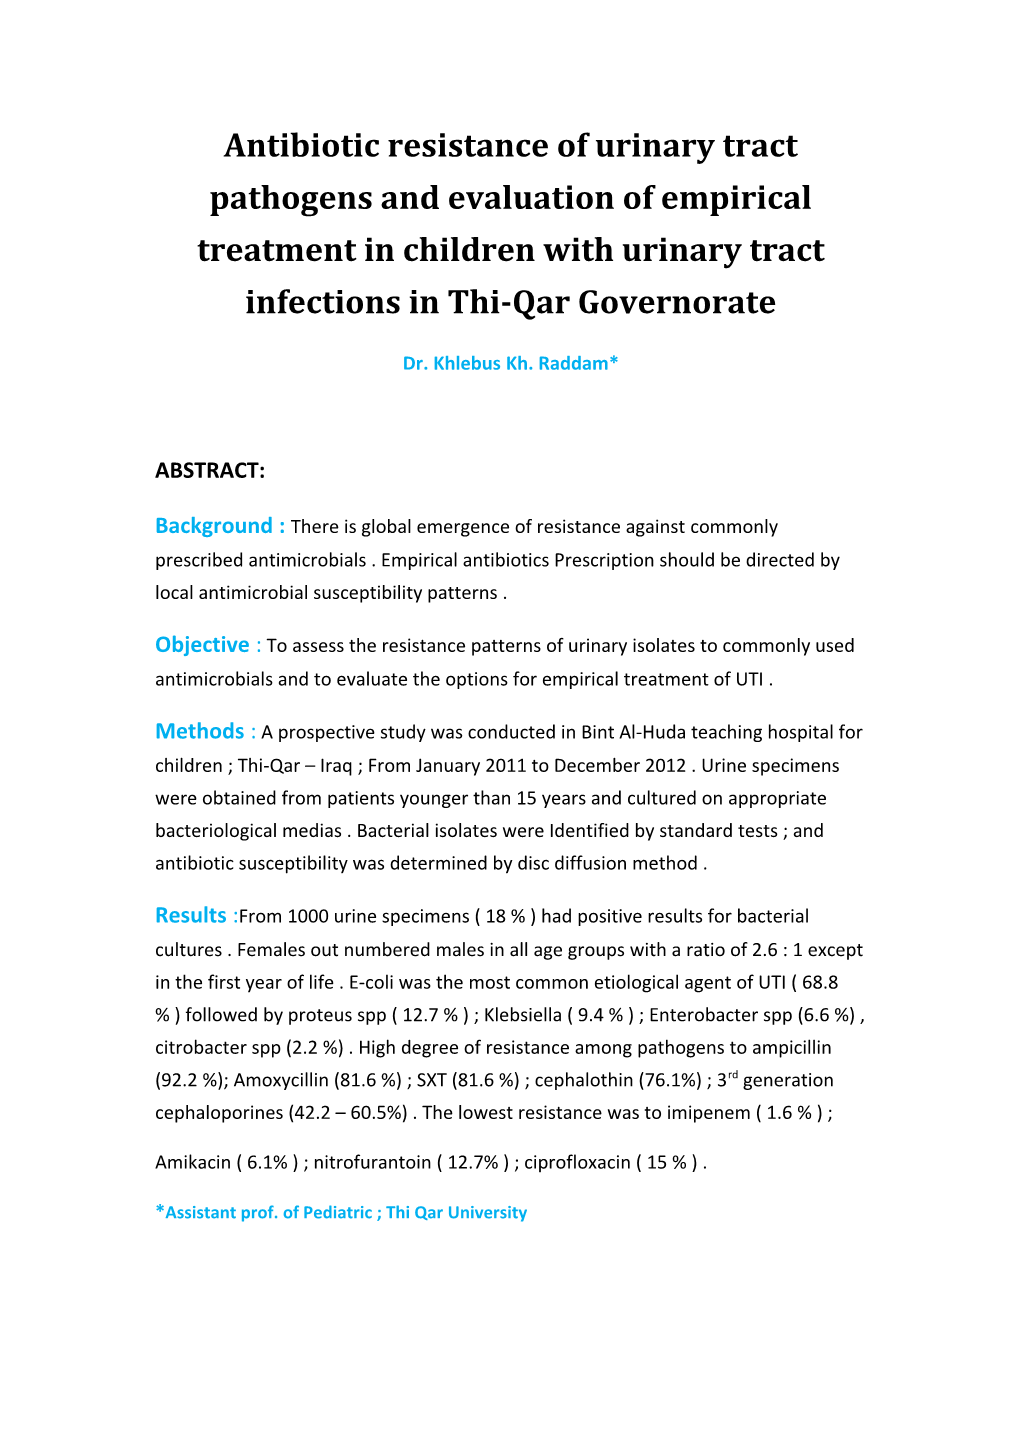 Antibiotic Resistance of Urinary Tract Pathogens and Evaluation of Empirical Treatment